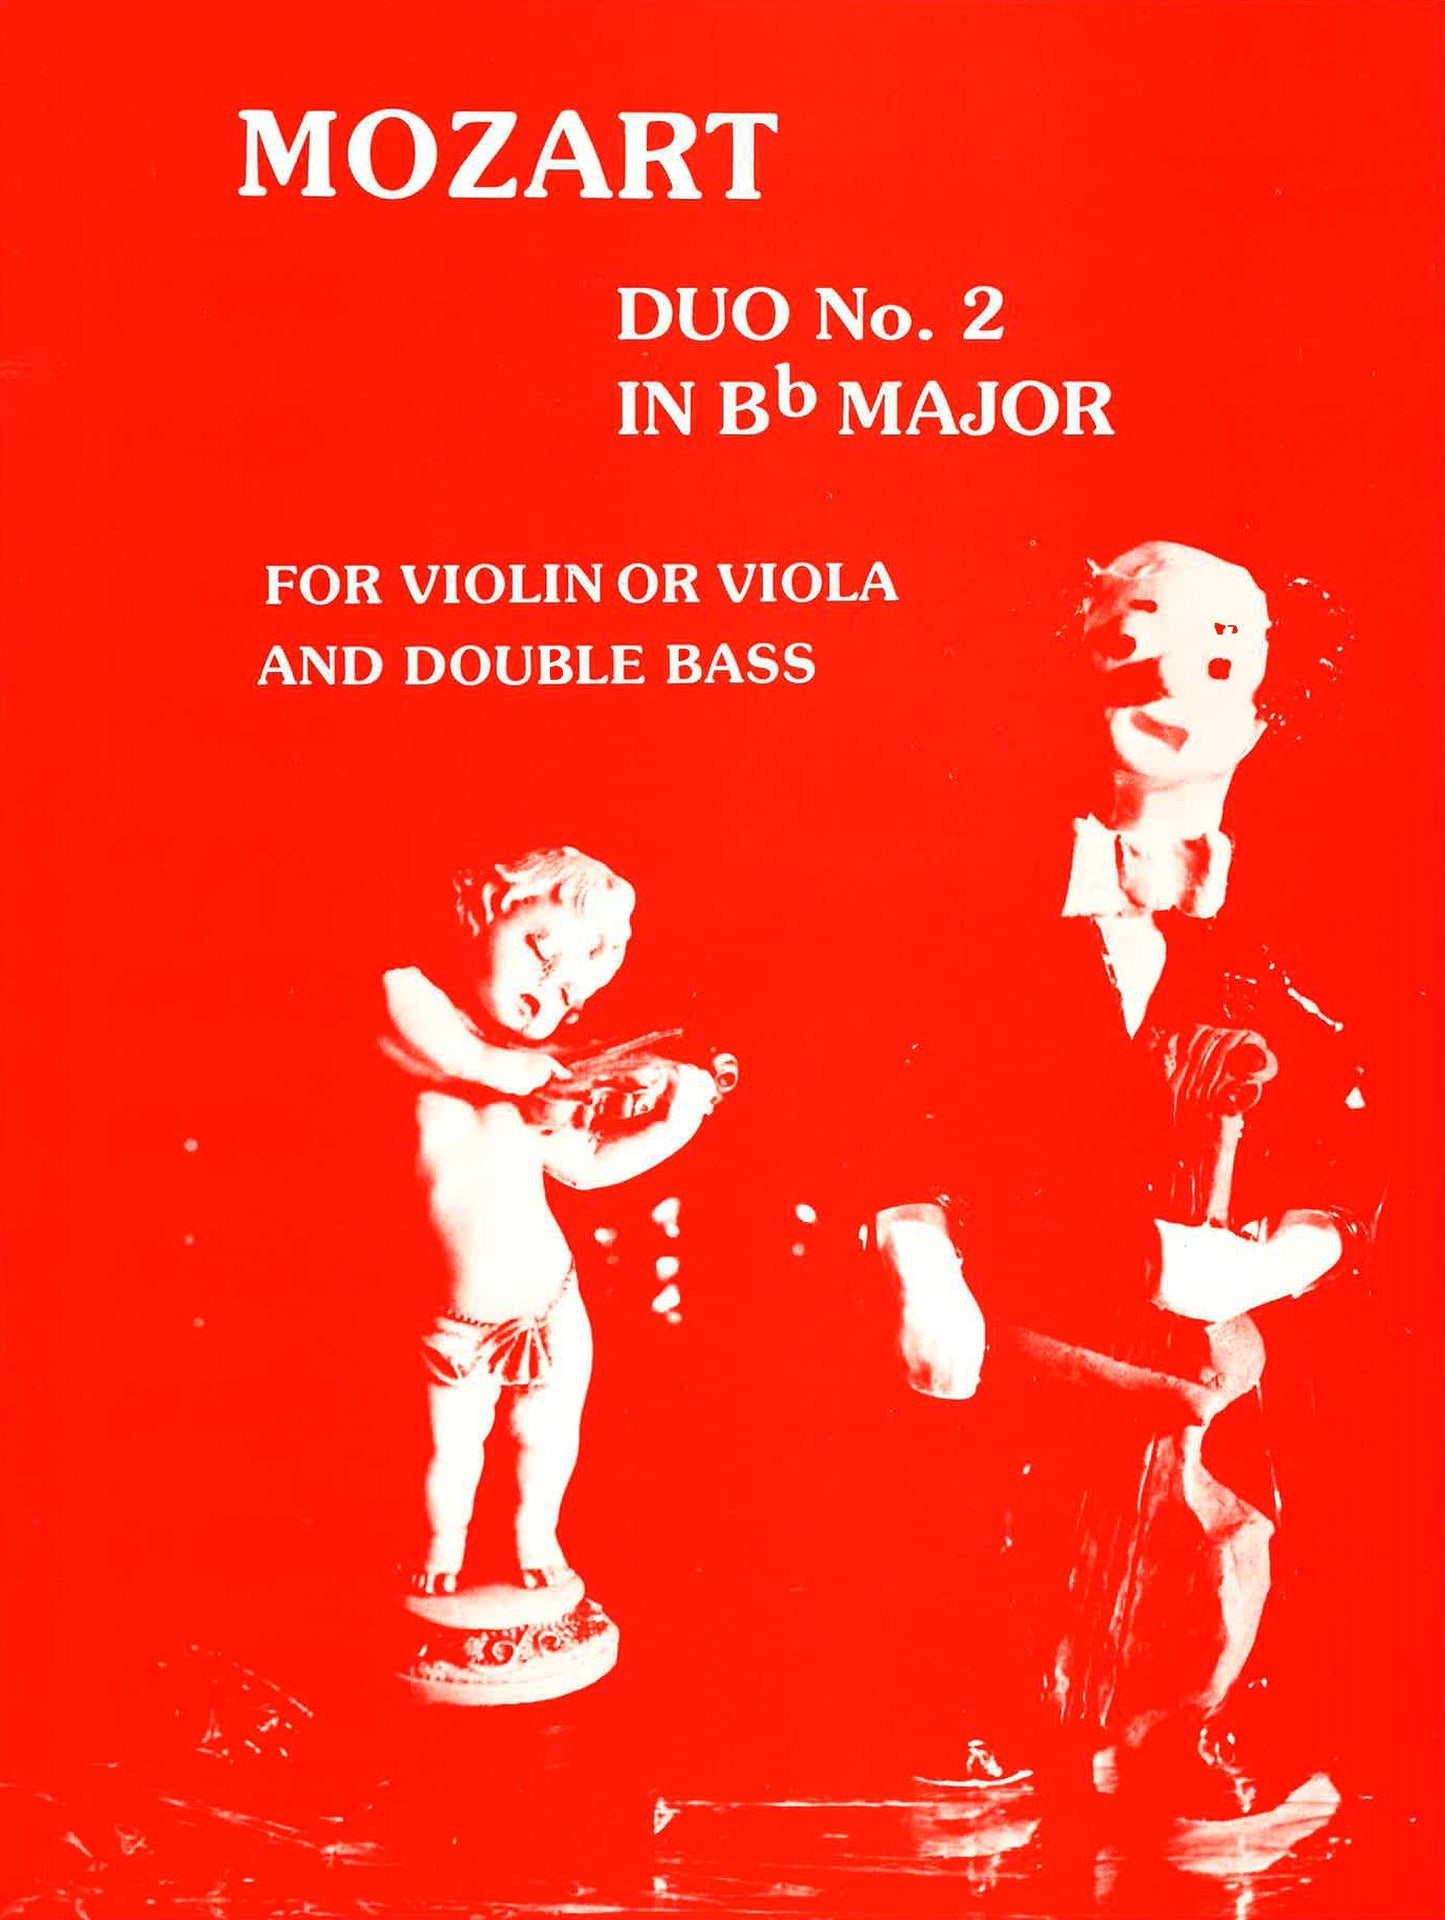 Mozart: Duo No. 2 in Bb Major for Violin or Viola and Double Bass